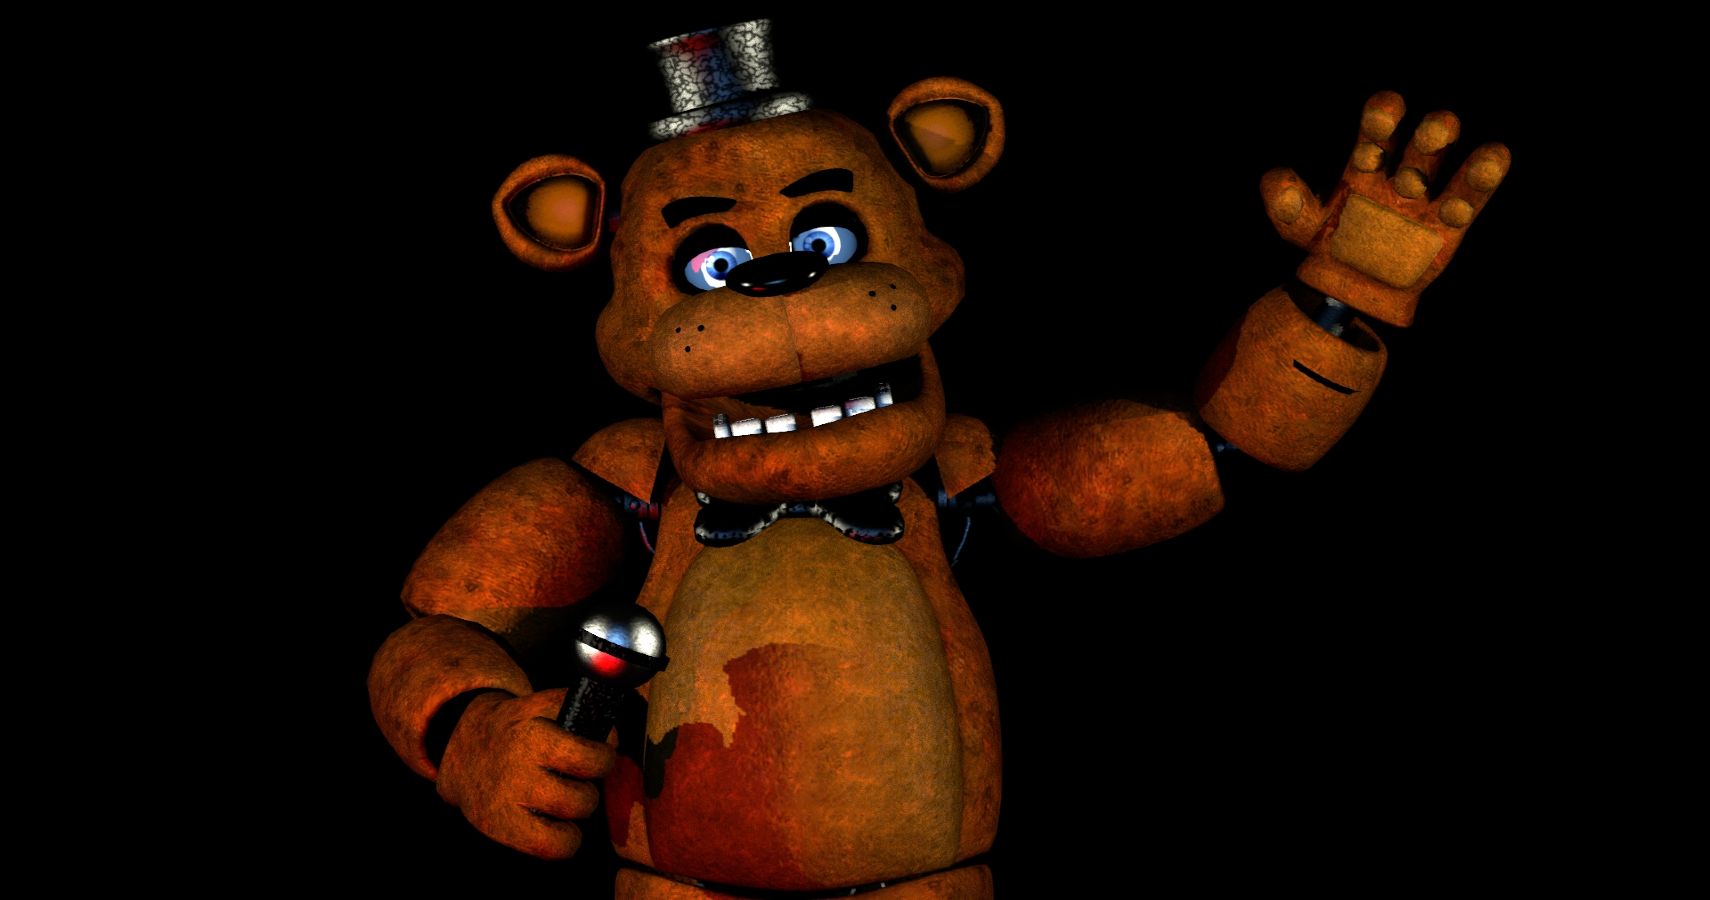 Five Nights At Freddy S 10 Things You Didn T Know About Freddy Fazbear S Pizza - roblox freddy fazbear's pizza